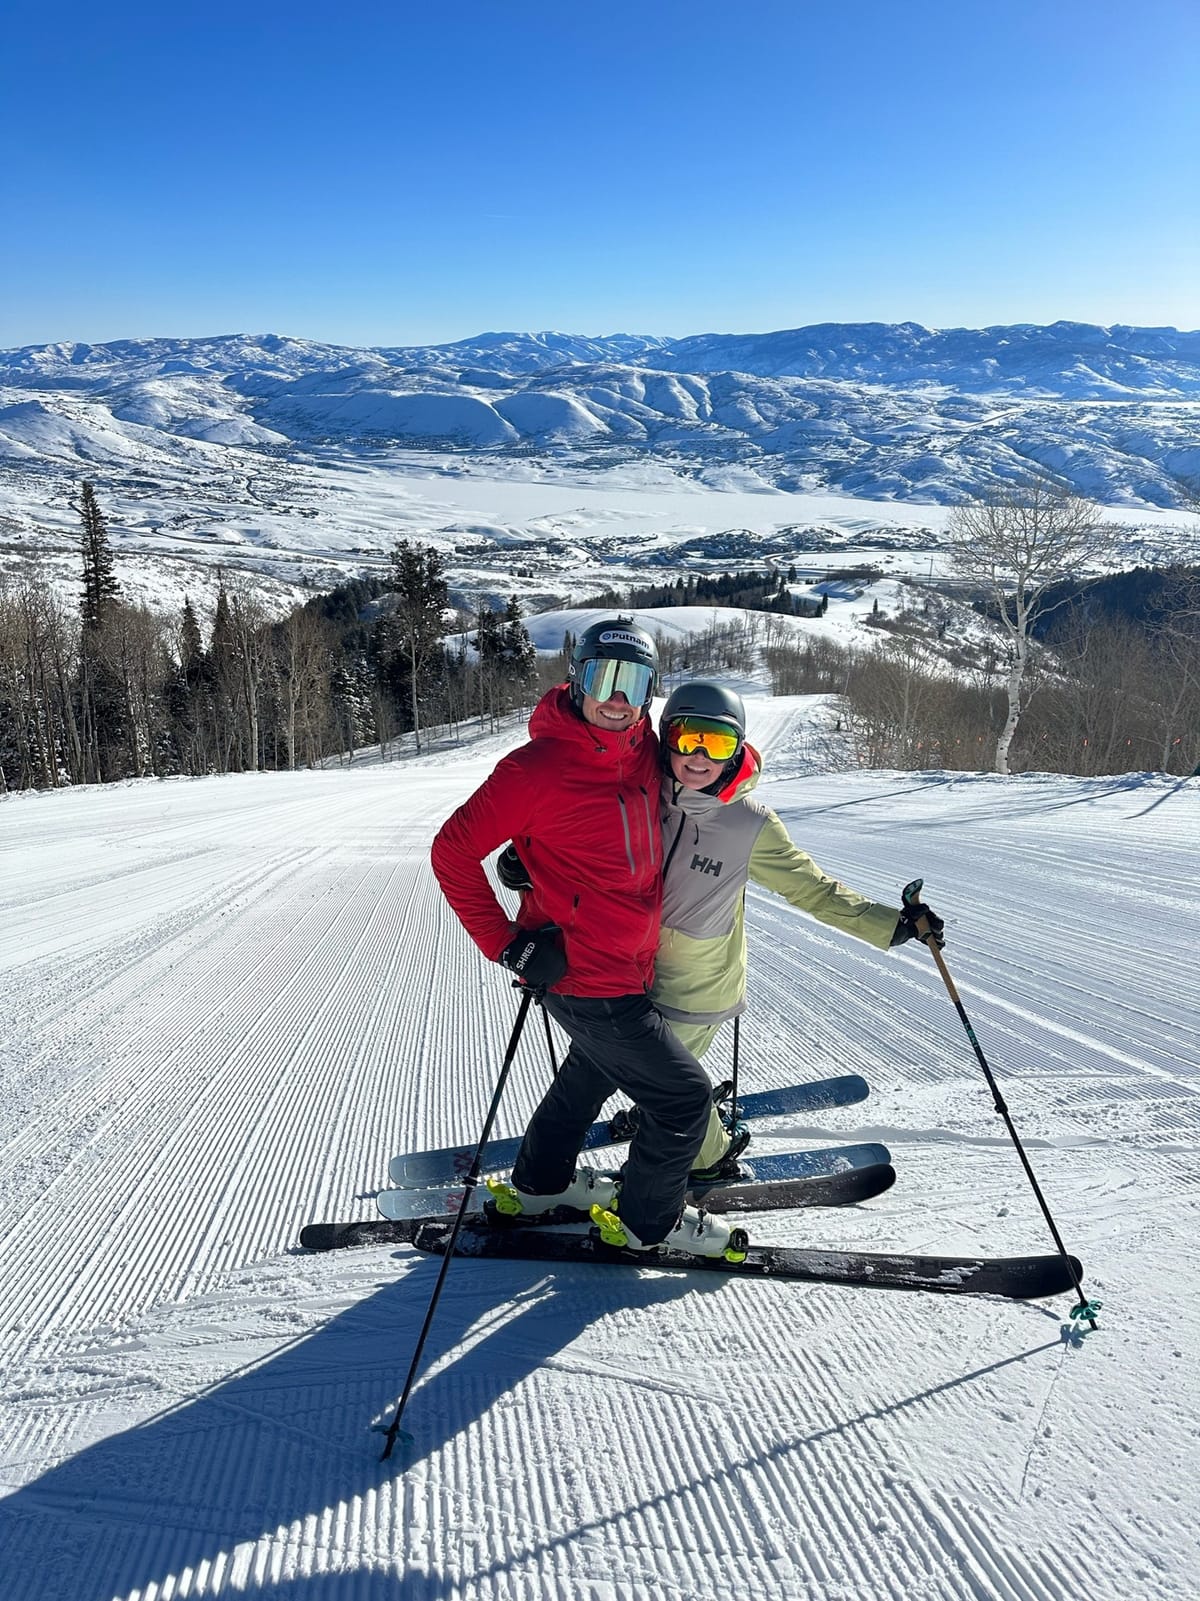 Utah’s Ski Area To More Than Double in Size To Become One of 5 Biggest in US